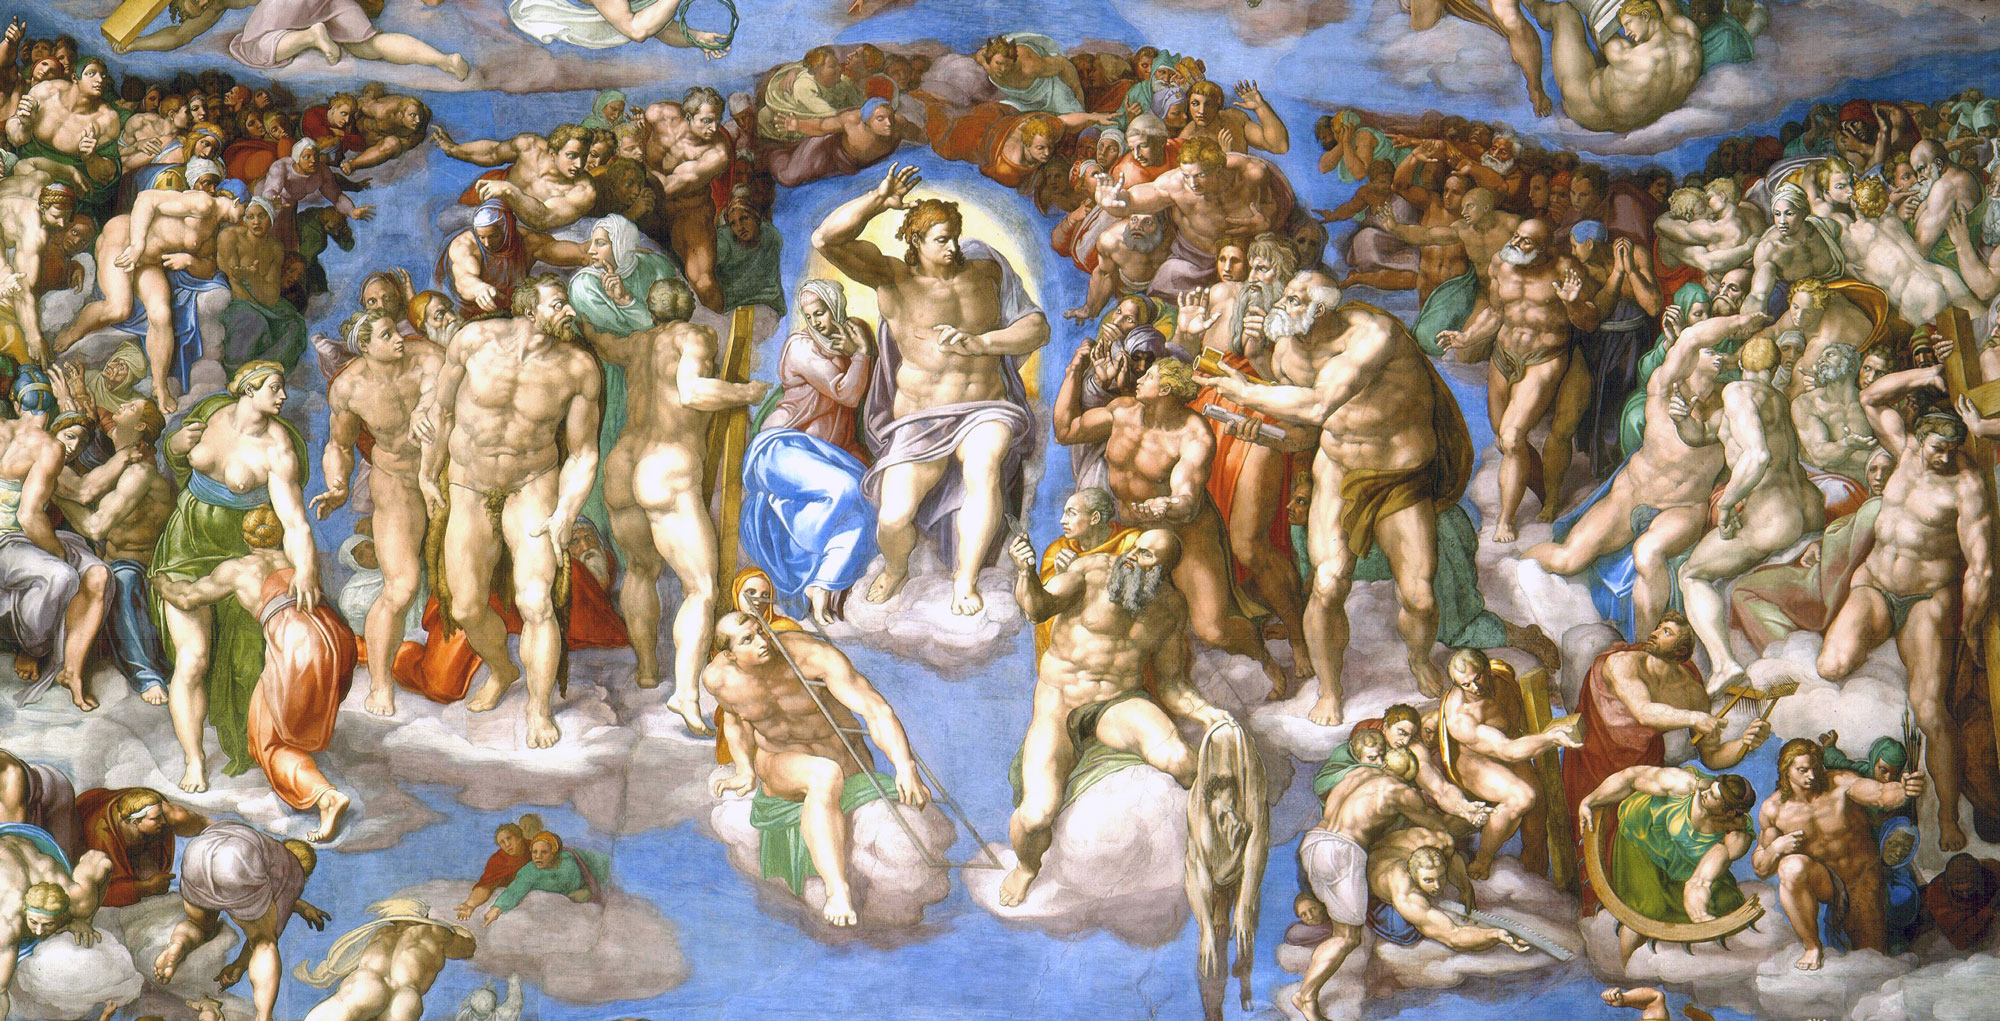 Detail from The Last Judgement (1536-41) by Michelangelo